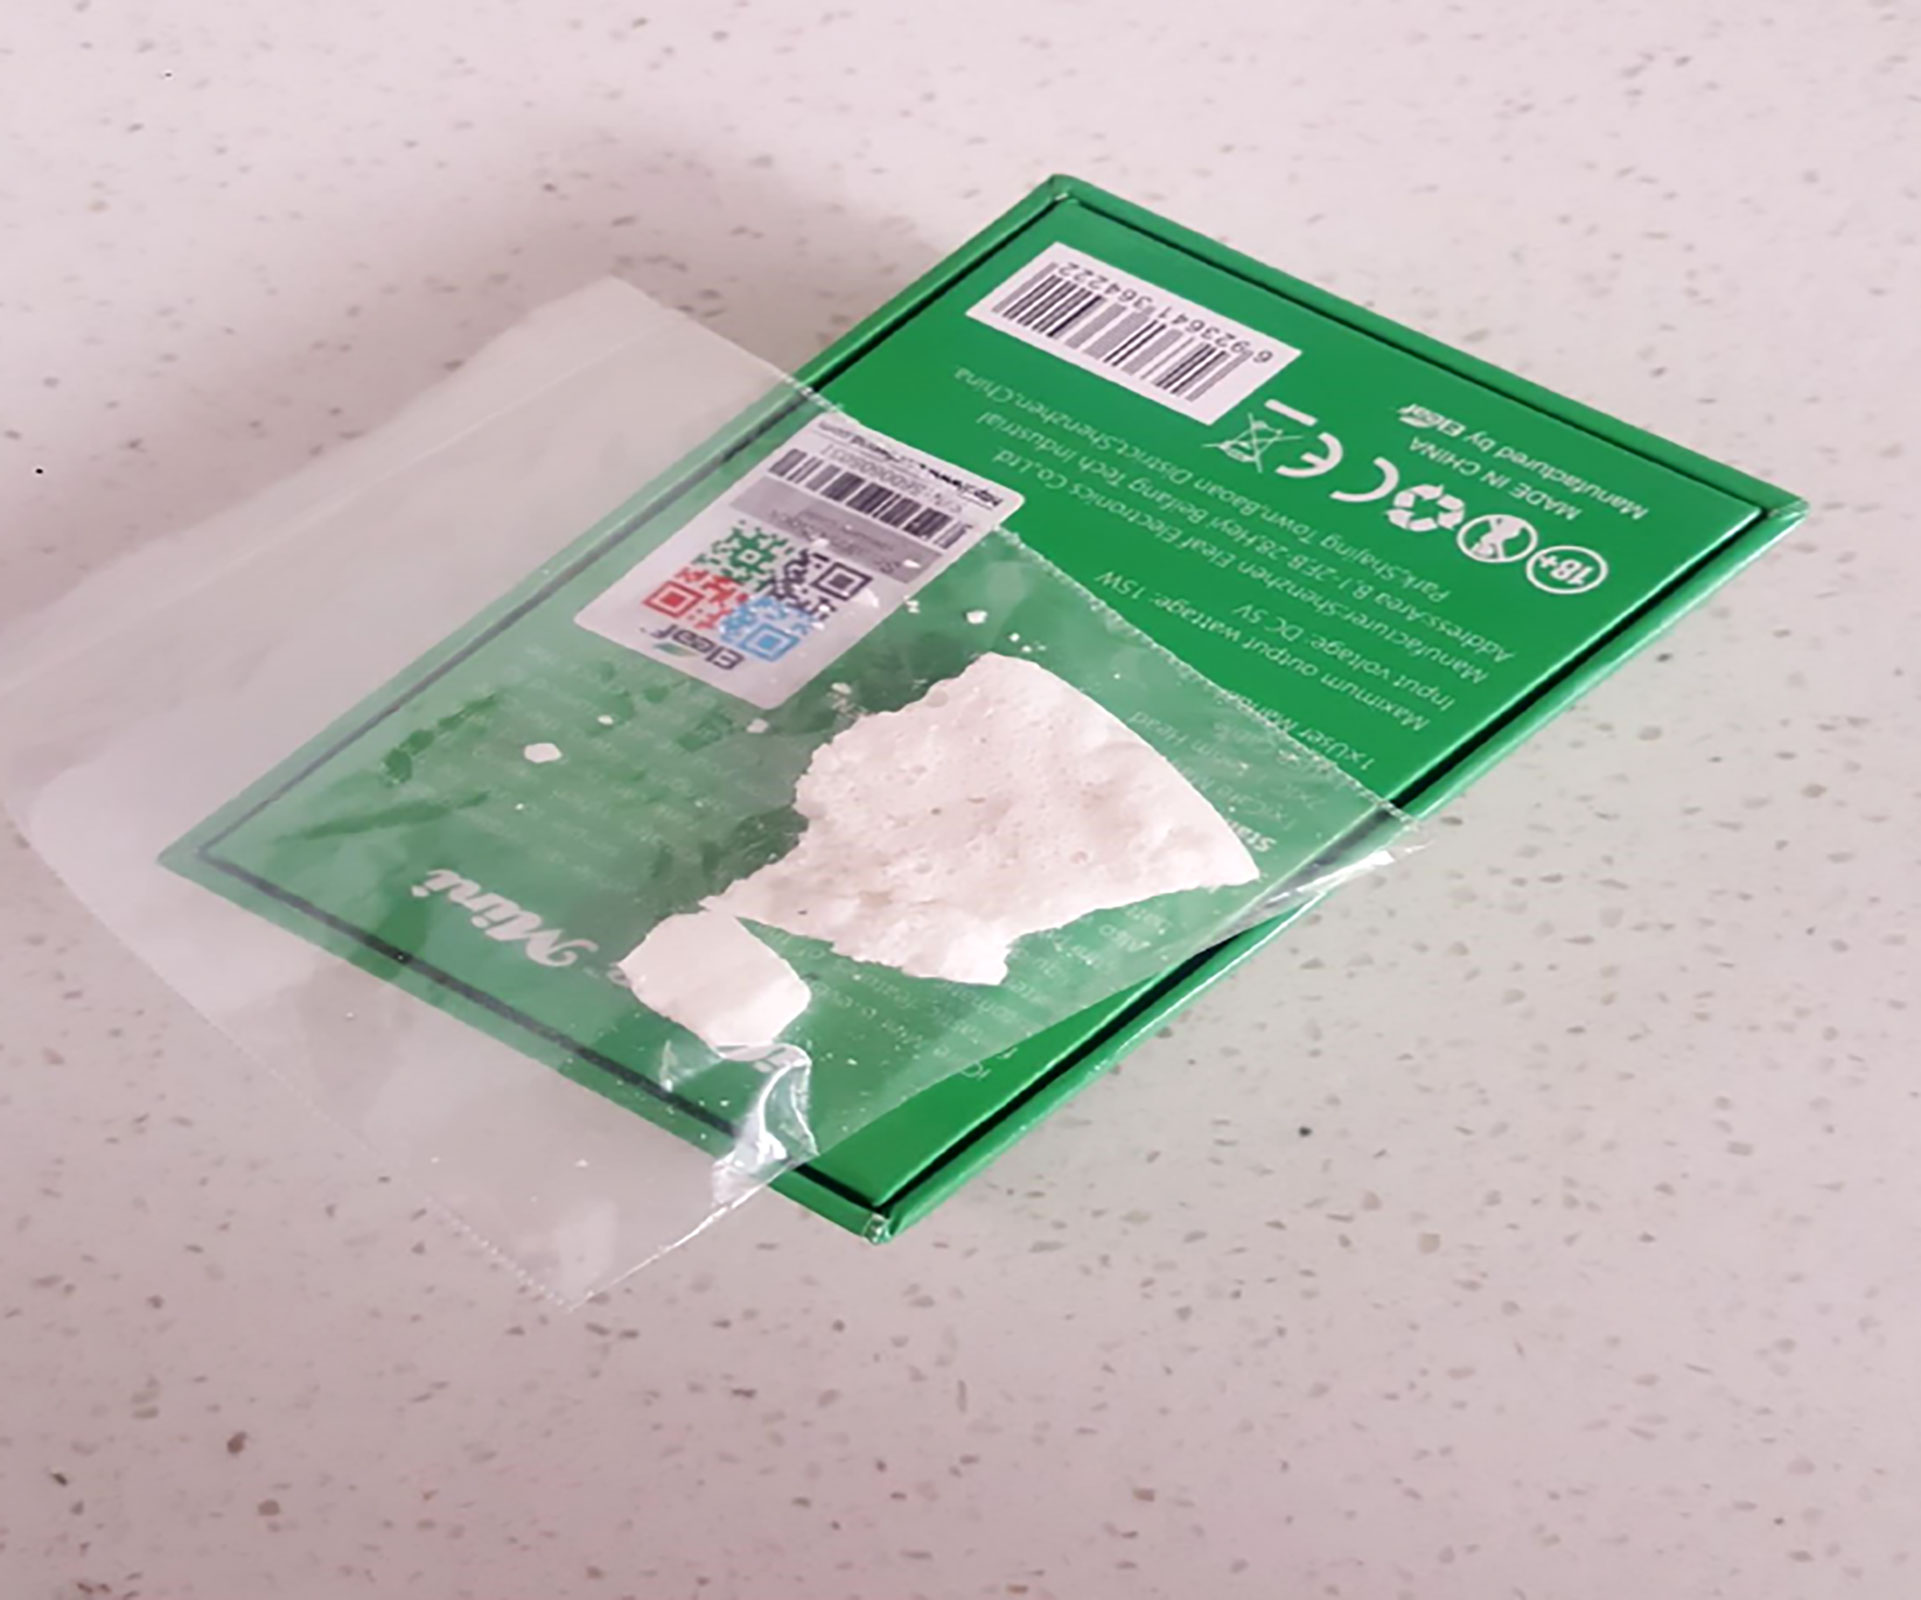 This photo from the US Department of Justice shows a white substance that appears to be cocaine.